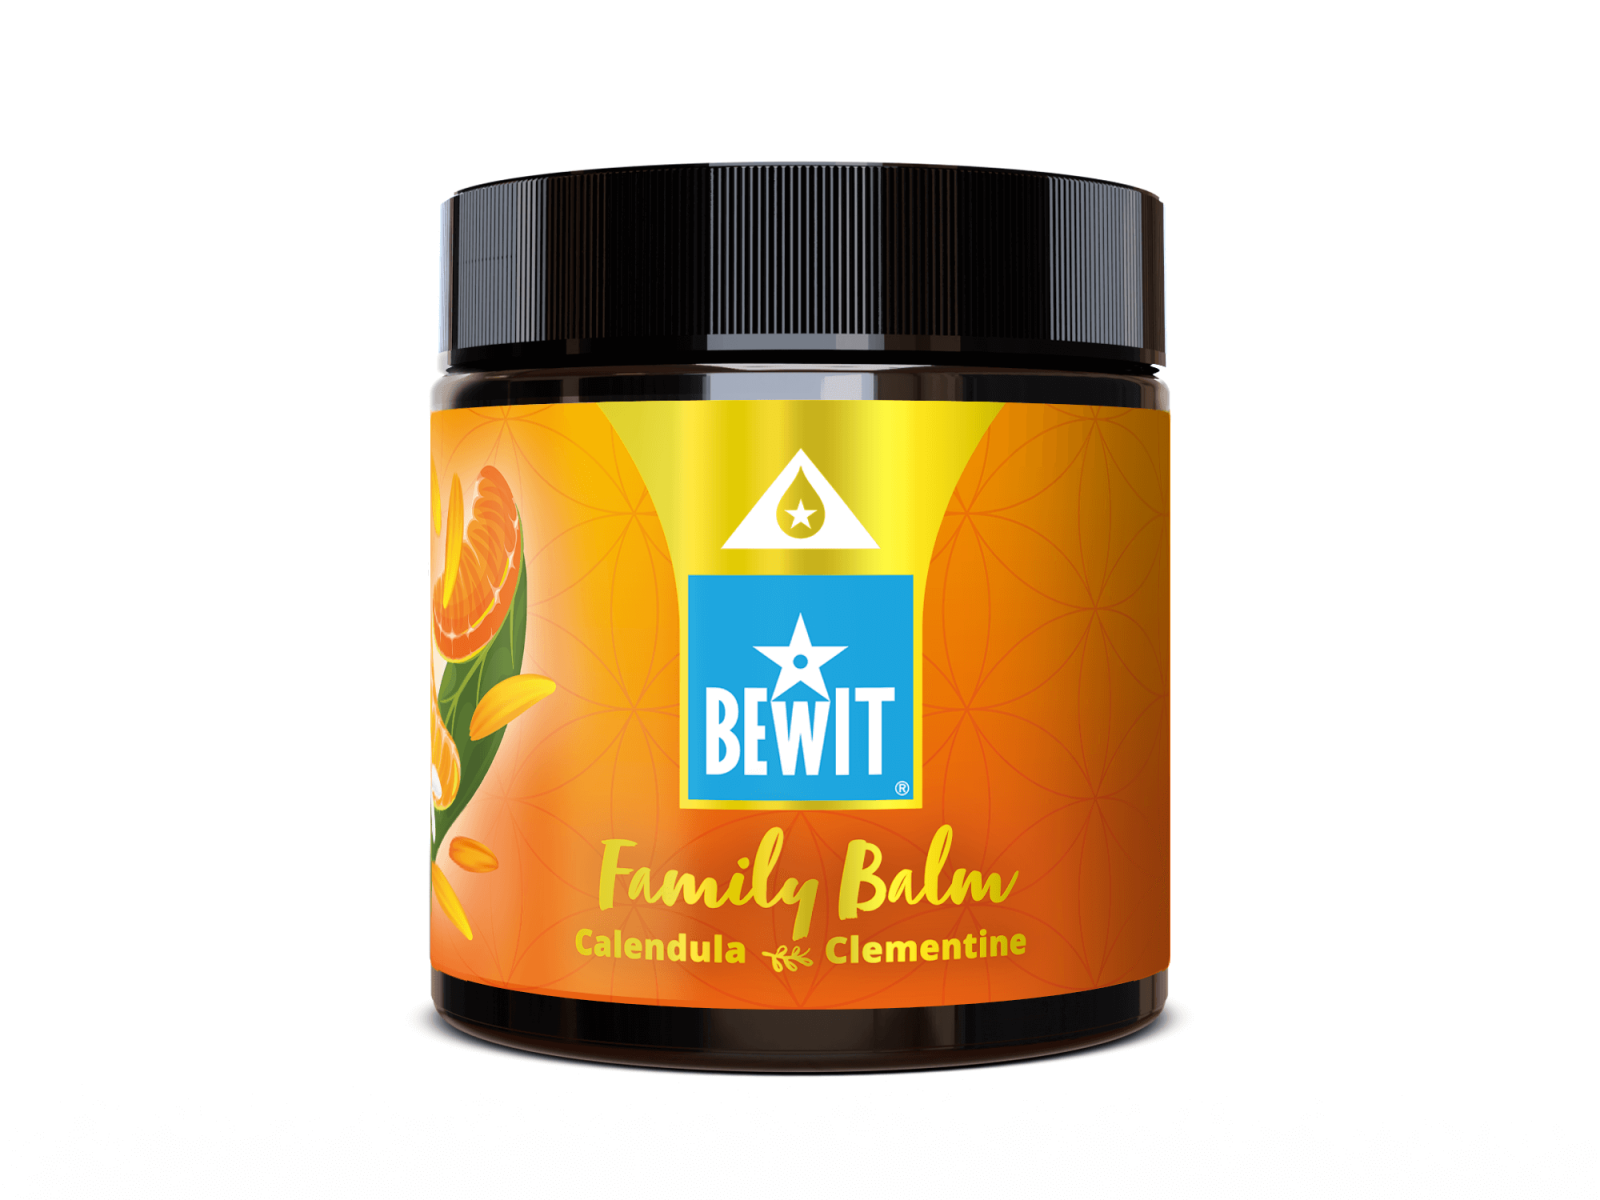 BEWIT FAMILY BALM CALENDULA AND CLEMENTINE - CARING BALM FOR THE WHOLE FAMILY - 2